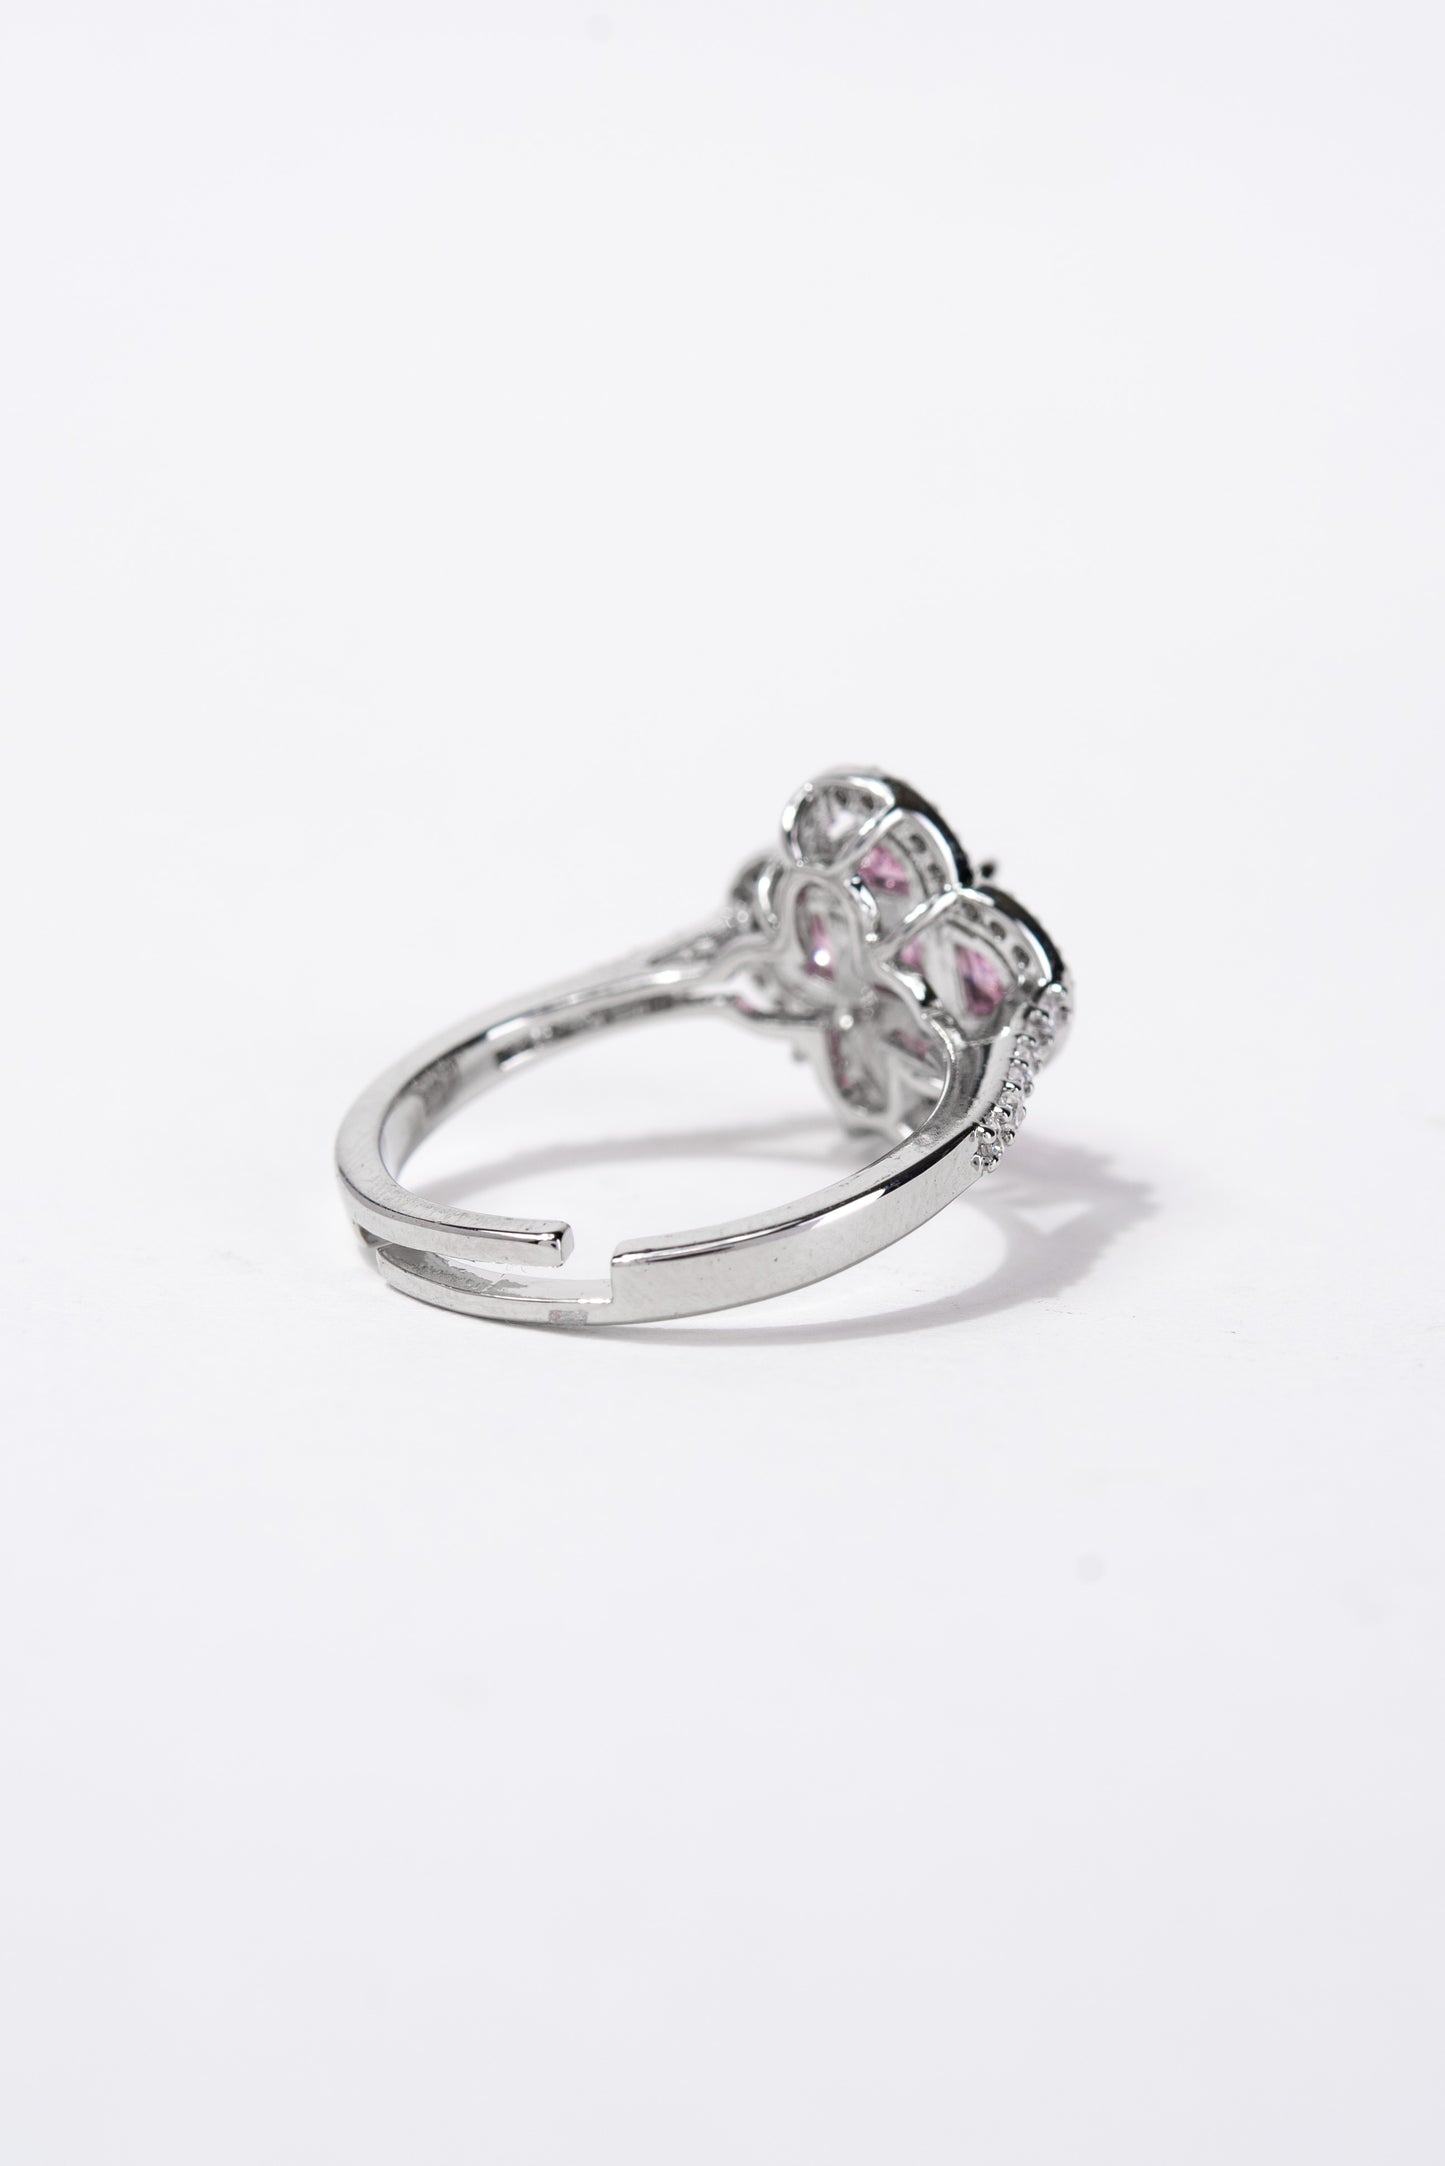 Floral CZ Solitaire Rhinestone Ring